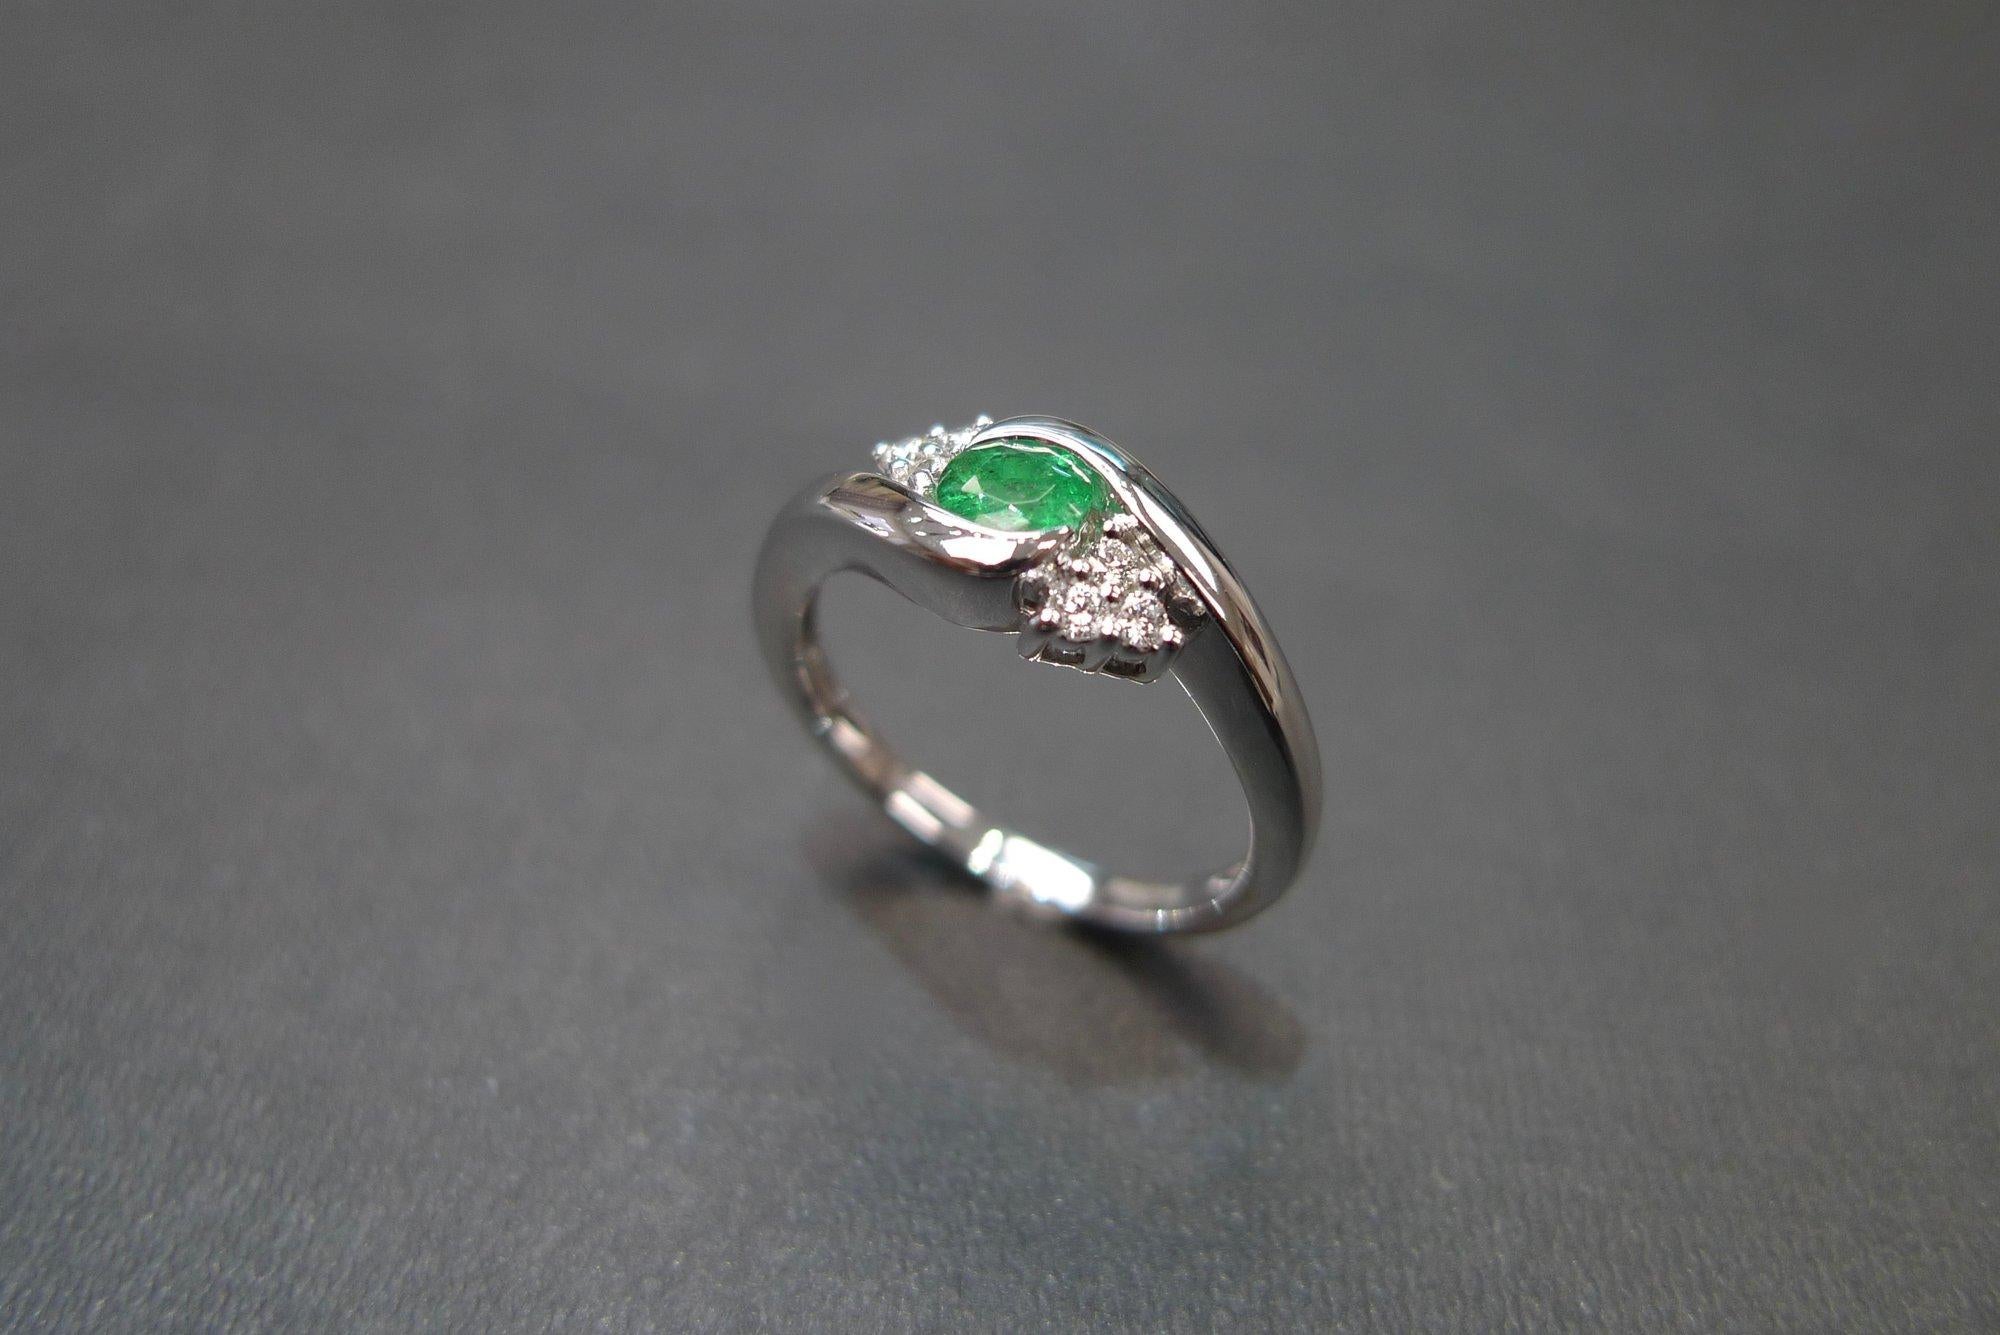 For Sale:  Tension Twist Round Cut Emerald and Diamond Engagement Ring in 18K White Gold 7